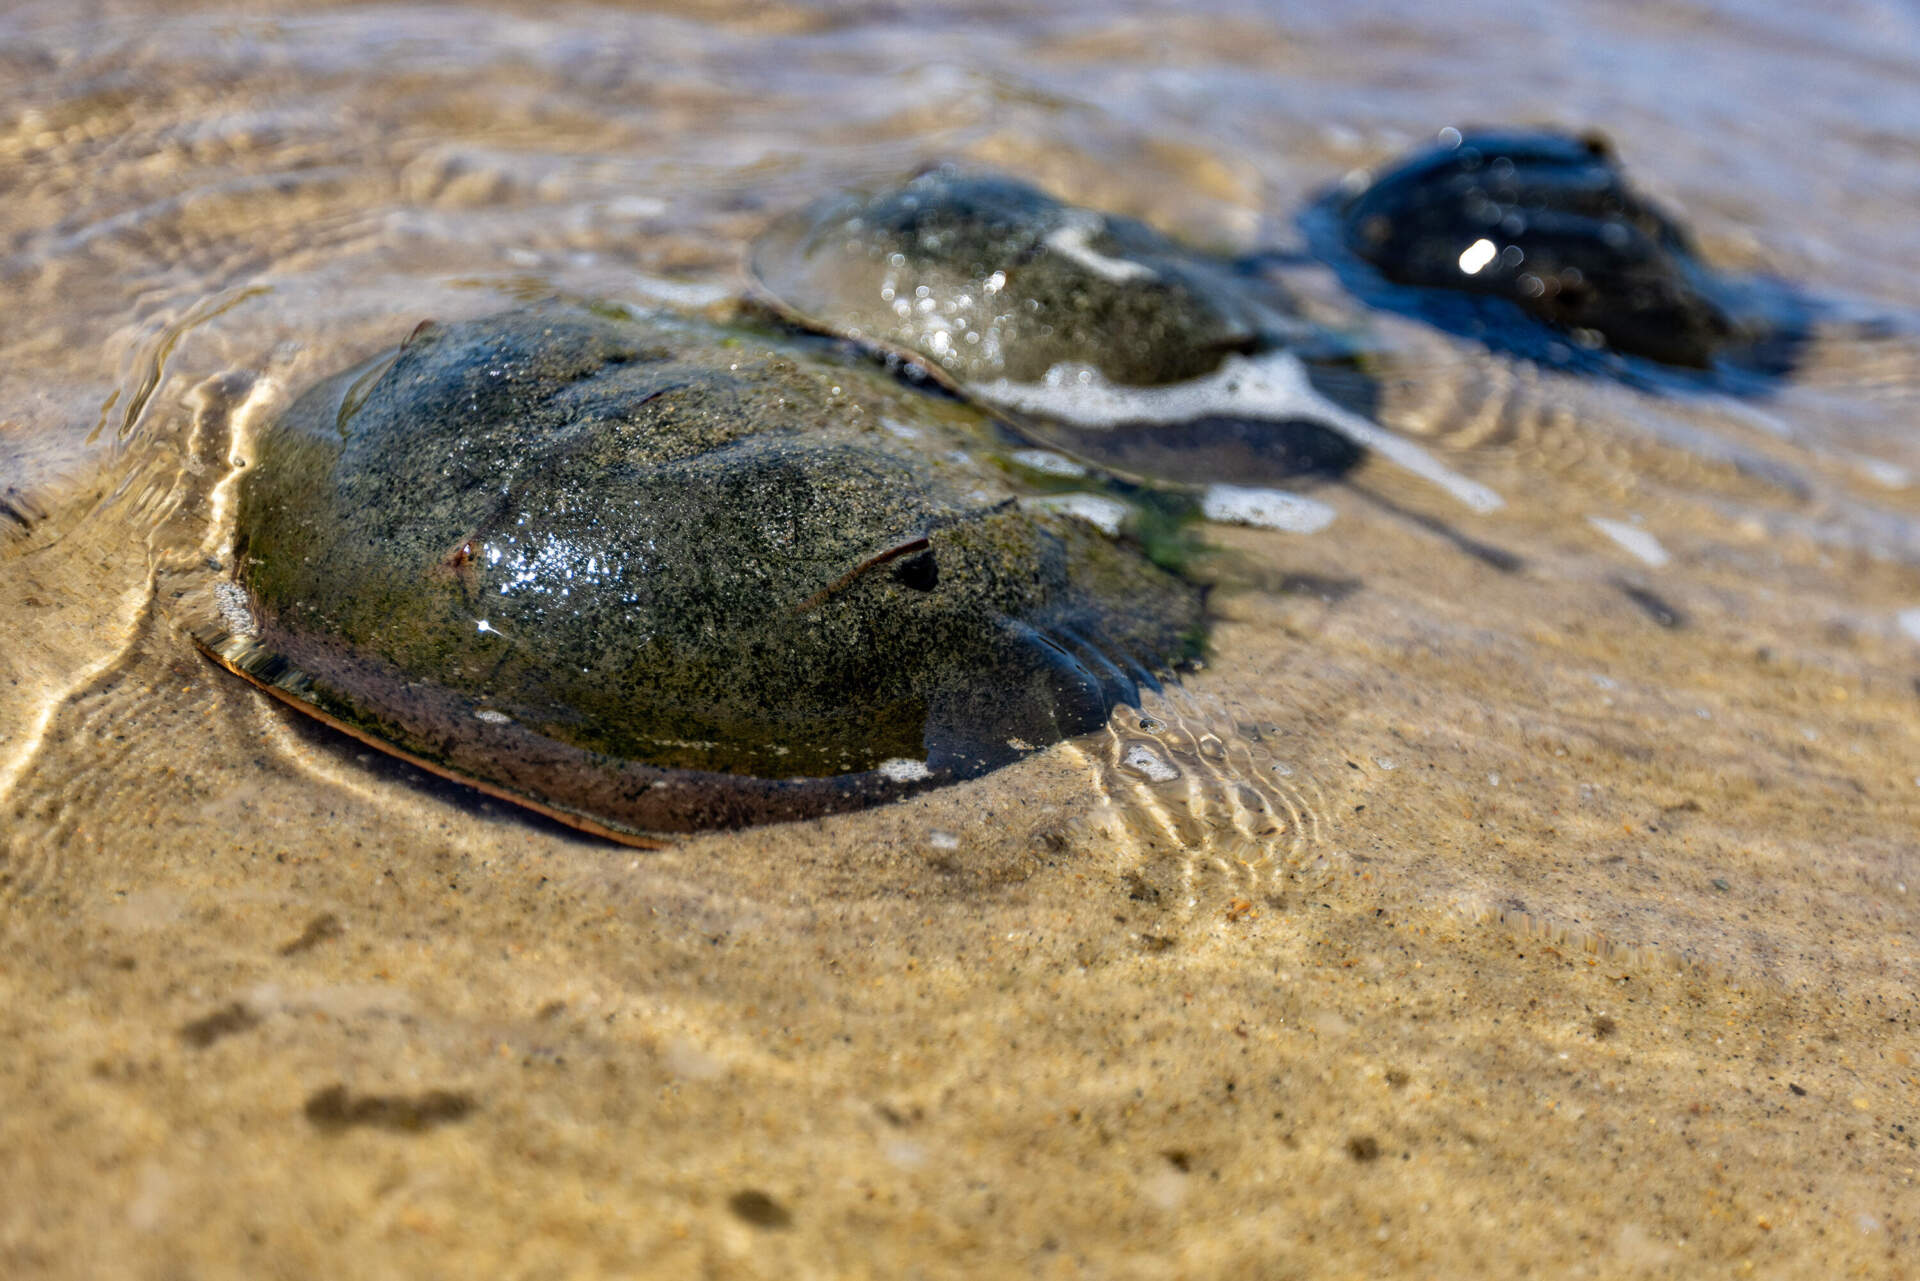 Two male horseshoe crabs attempt to latch onto a female as she is looking for a spot to lay eggs during horseshoe crab breeding season in Orleans. (Jesse Costa/WBUR)